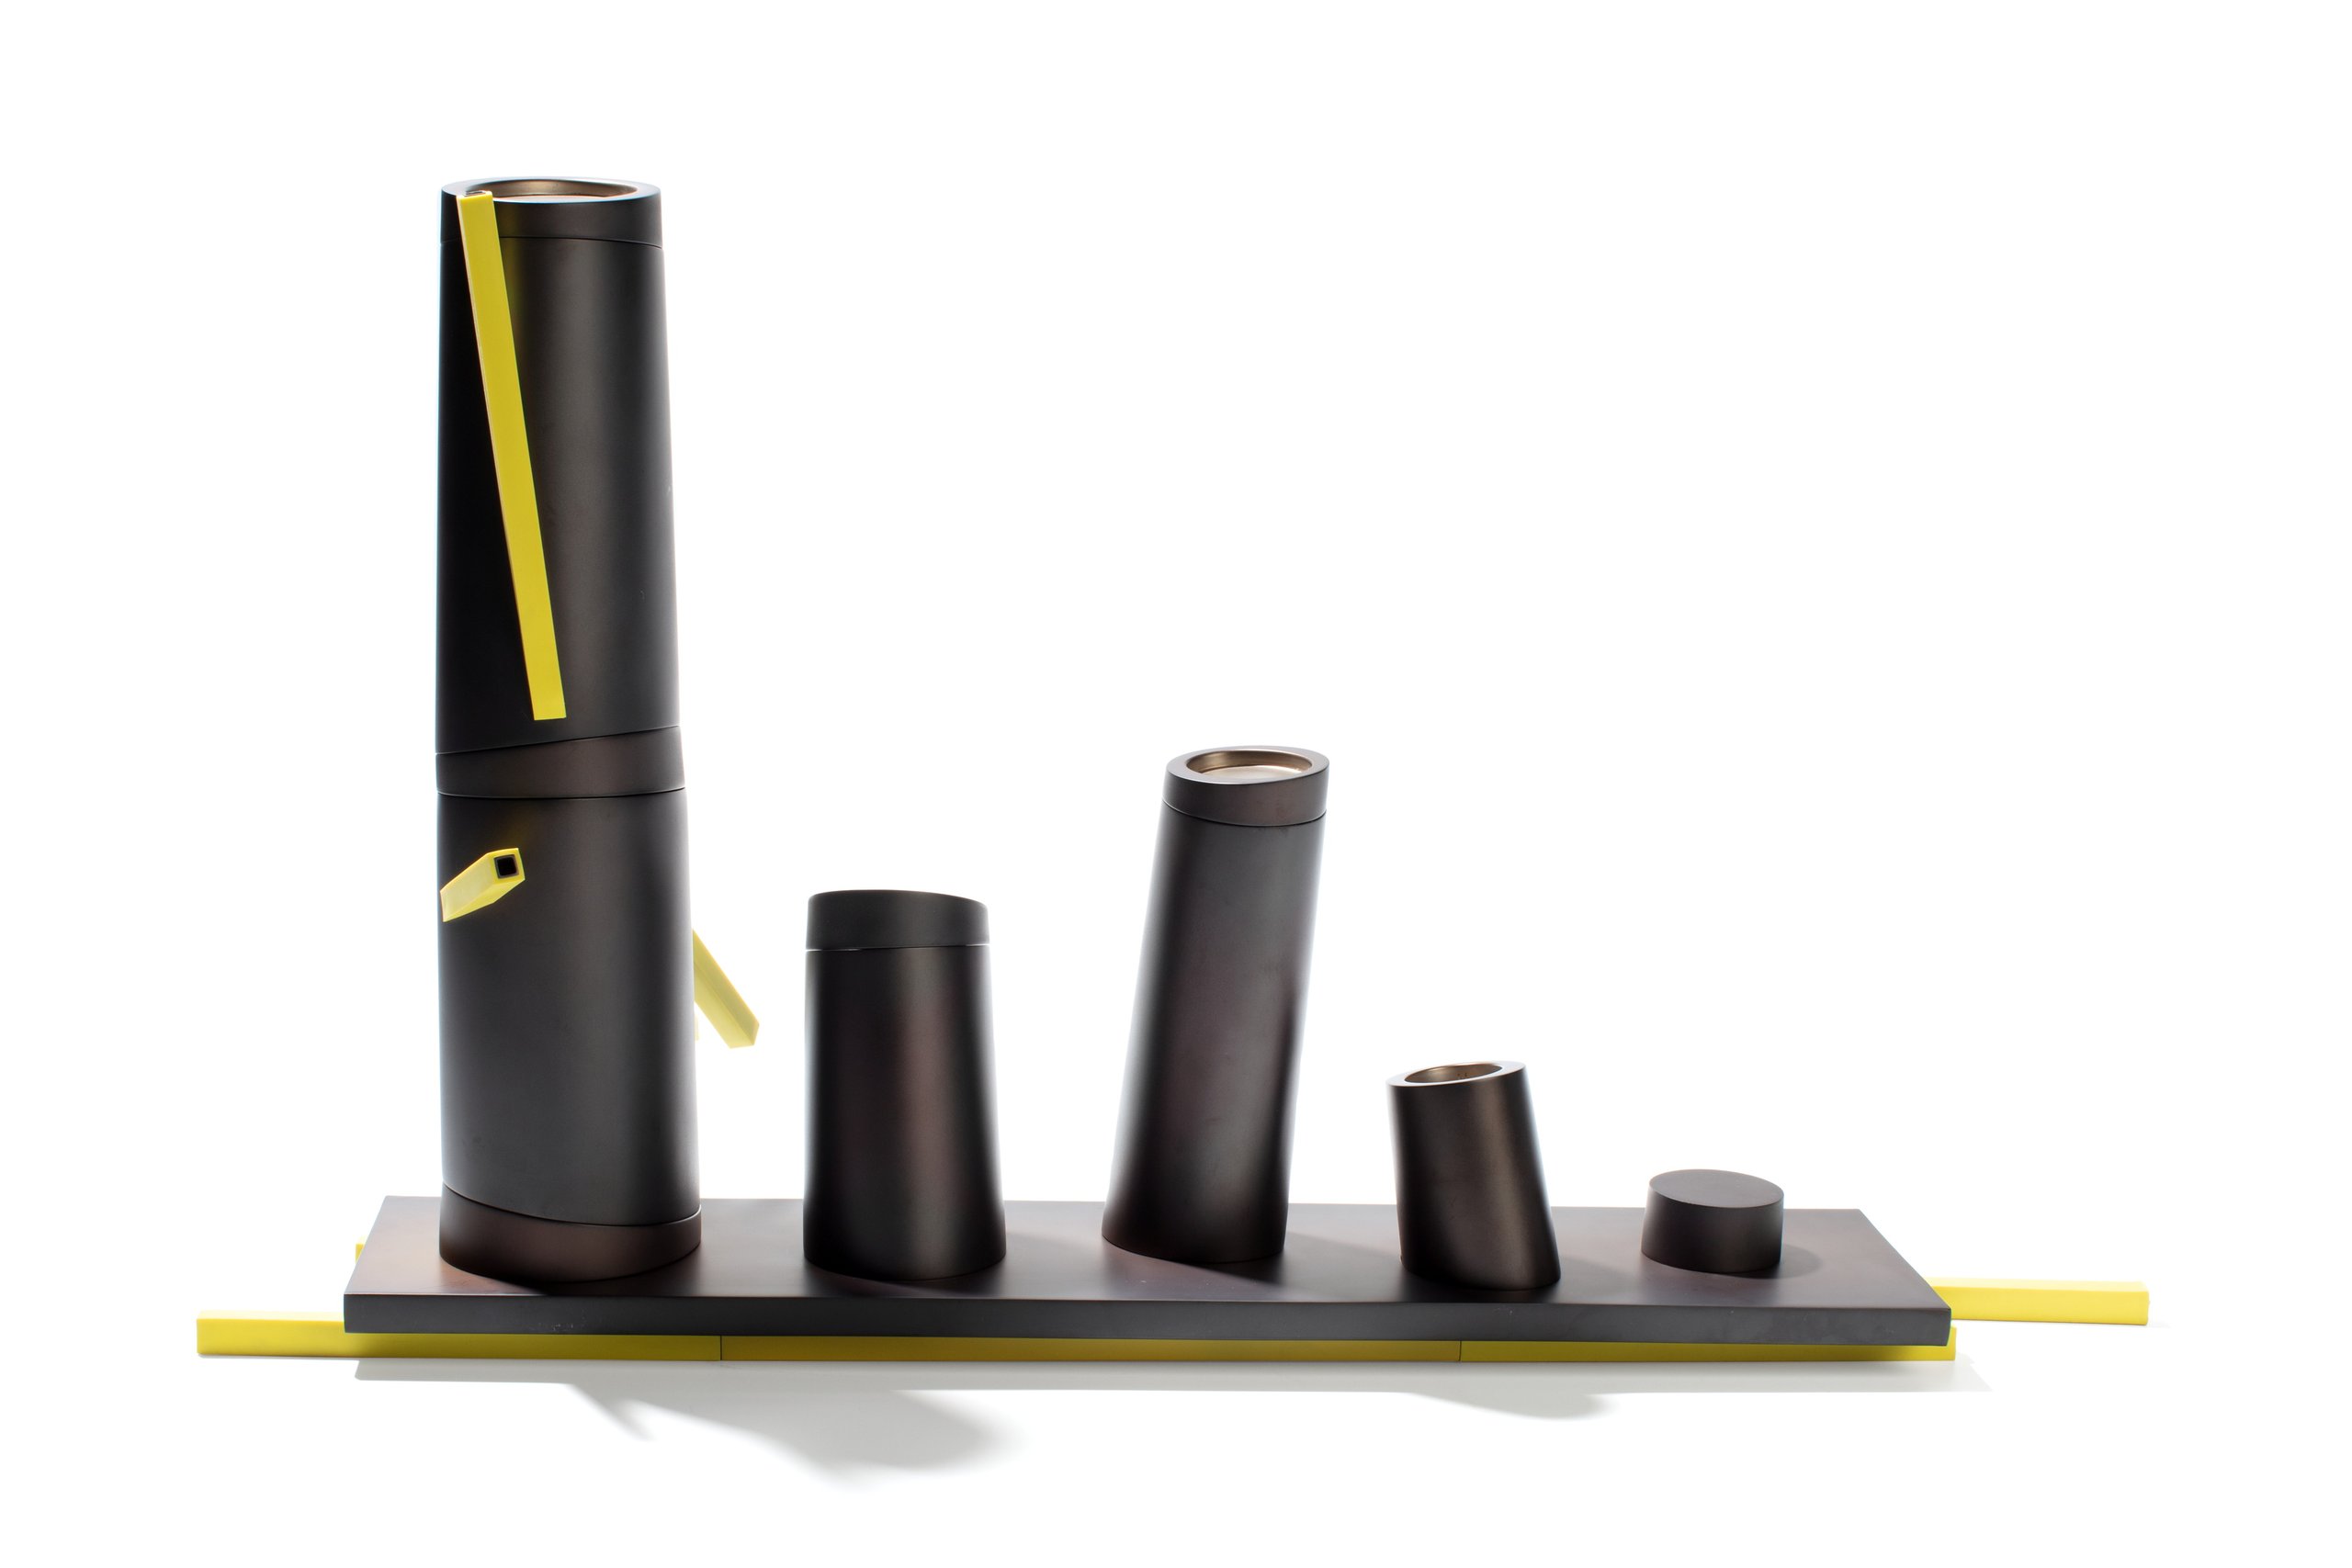 'Tea and Coffee Tower' designed by Denton Corker Marshall for Alessi